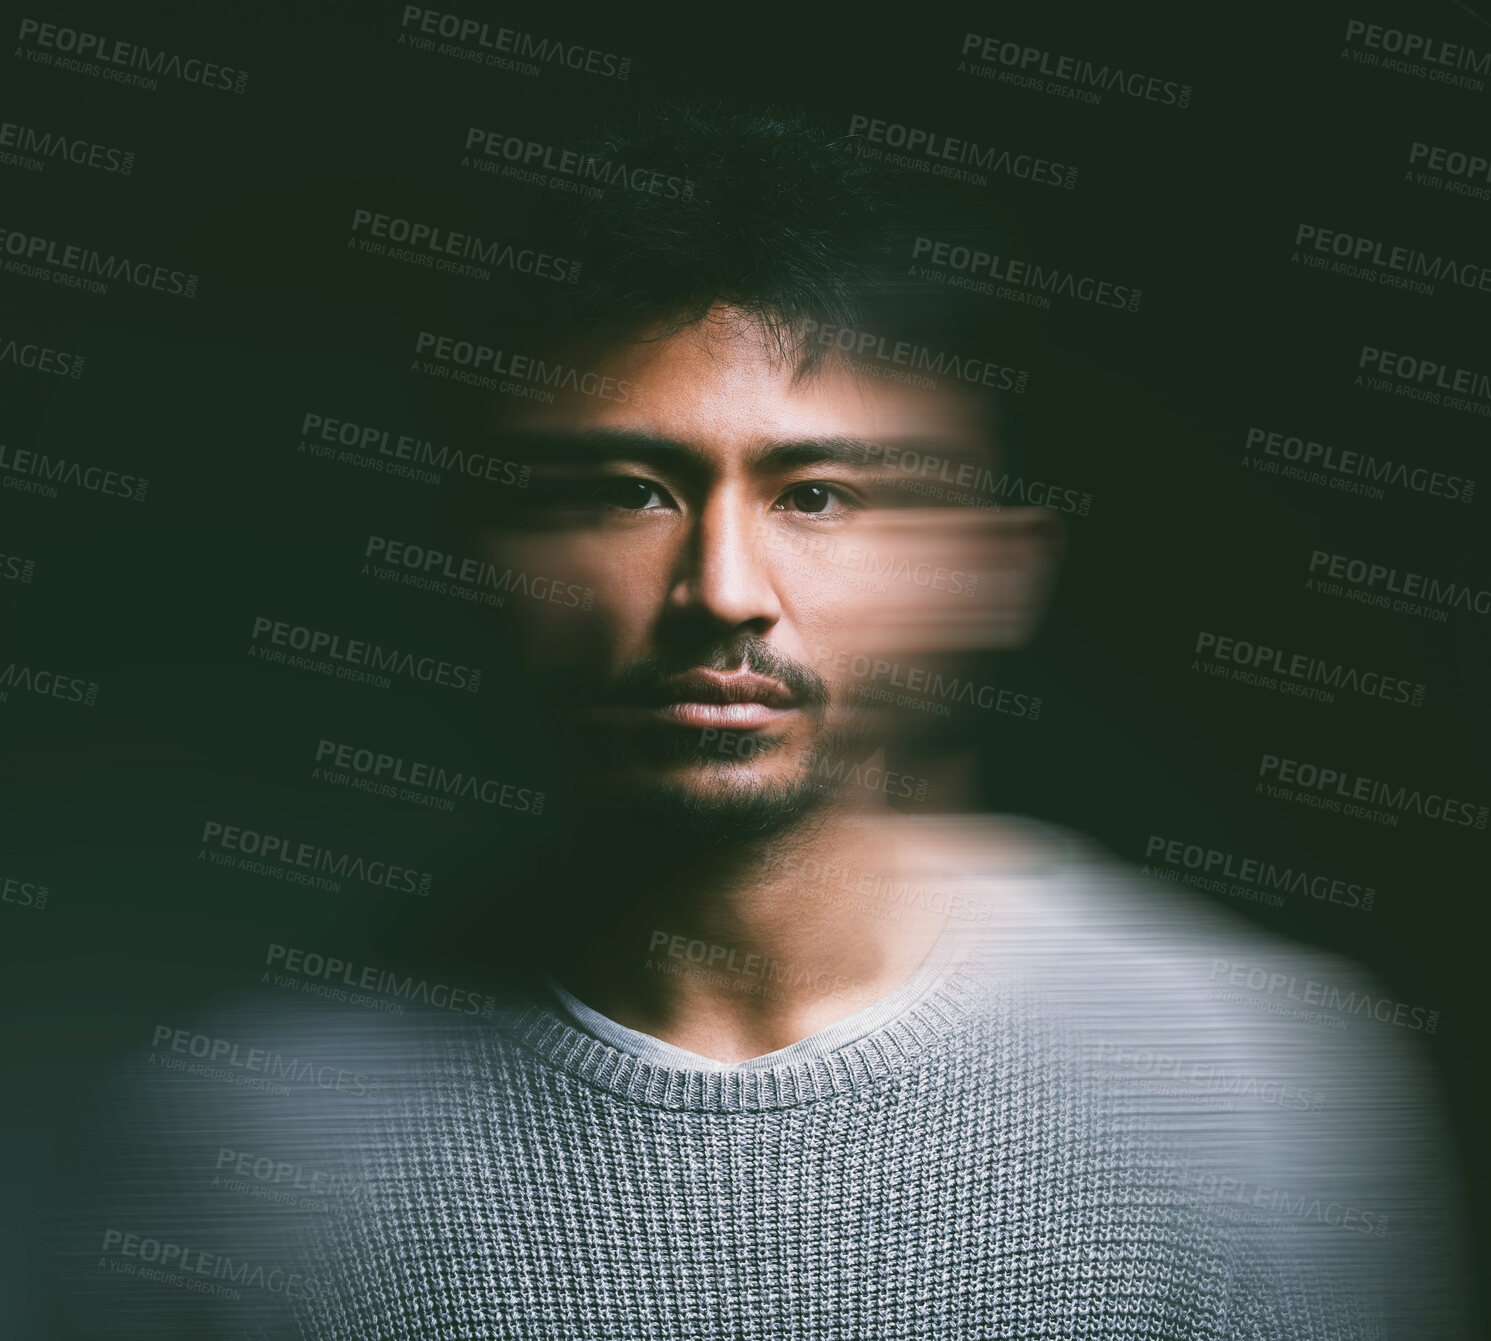 Buy stock photo Studio shot of a young man experiencing mental illness against a blurred black background